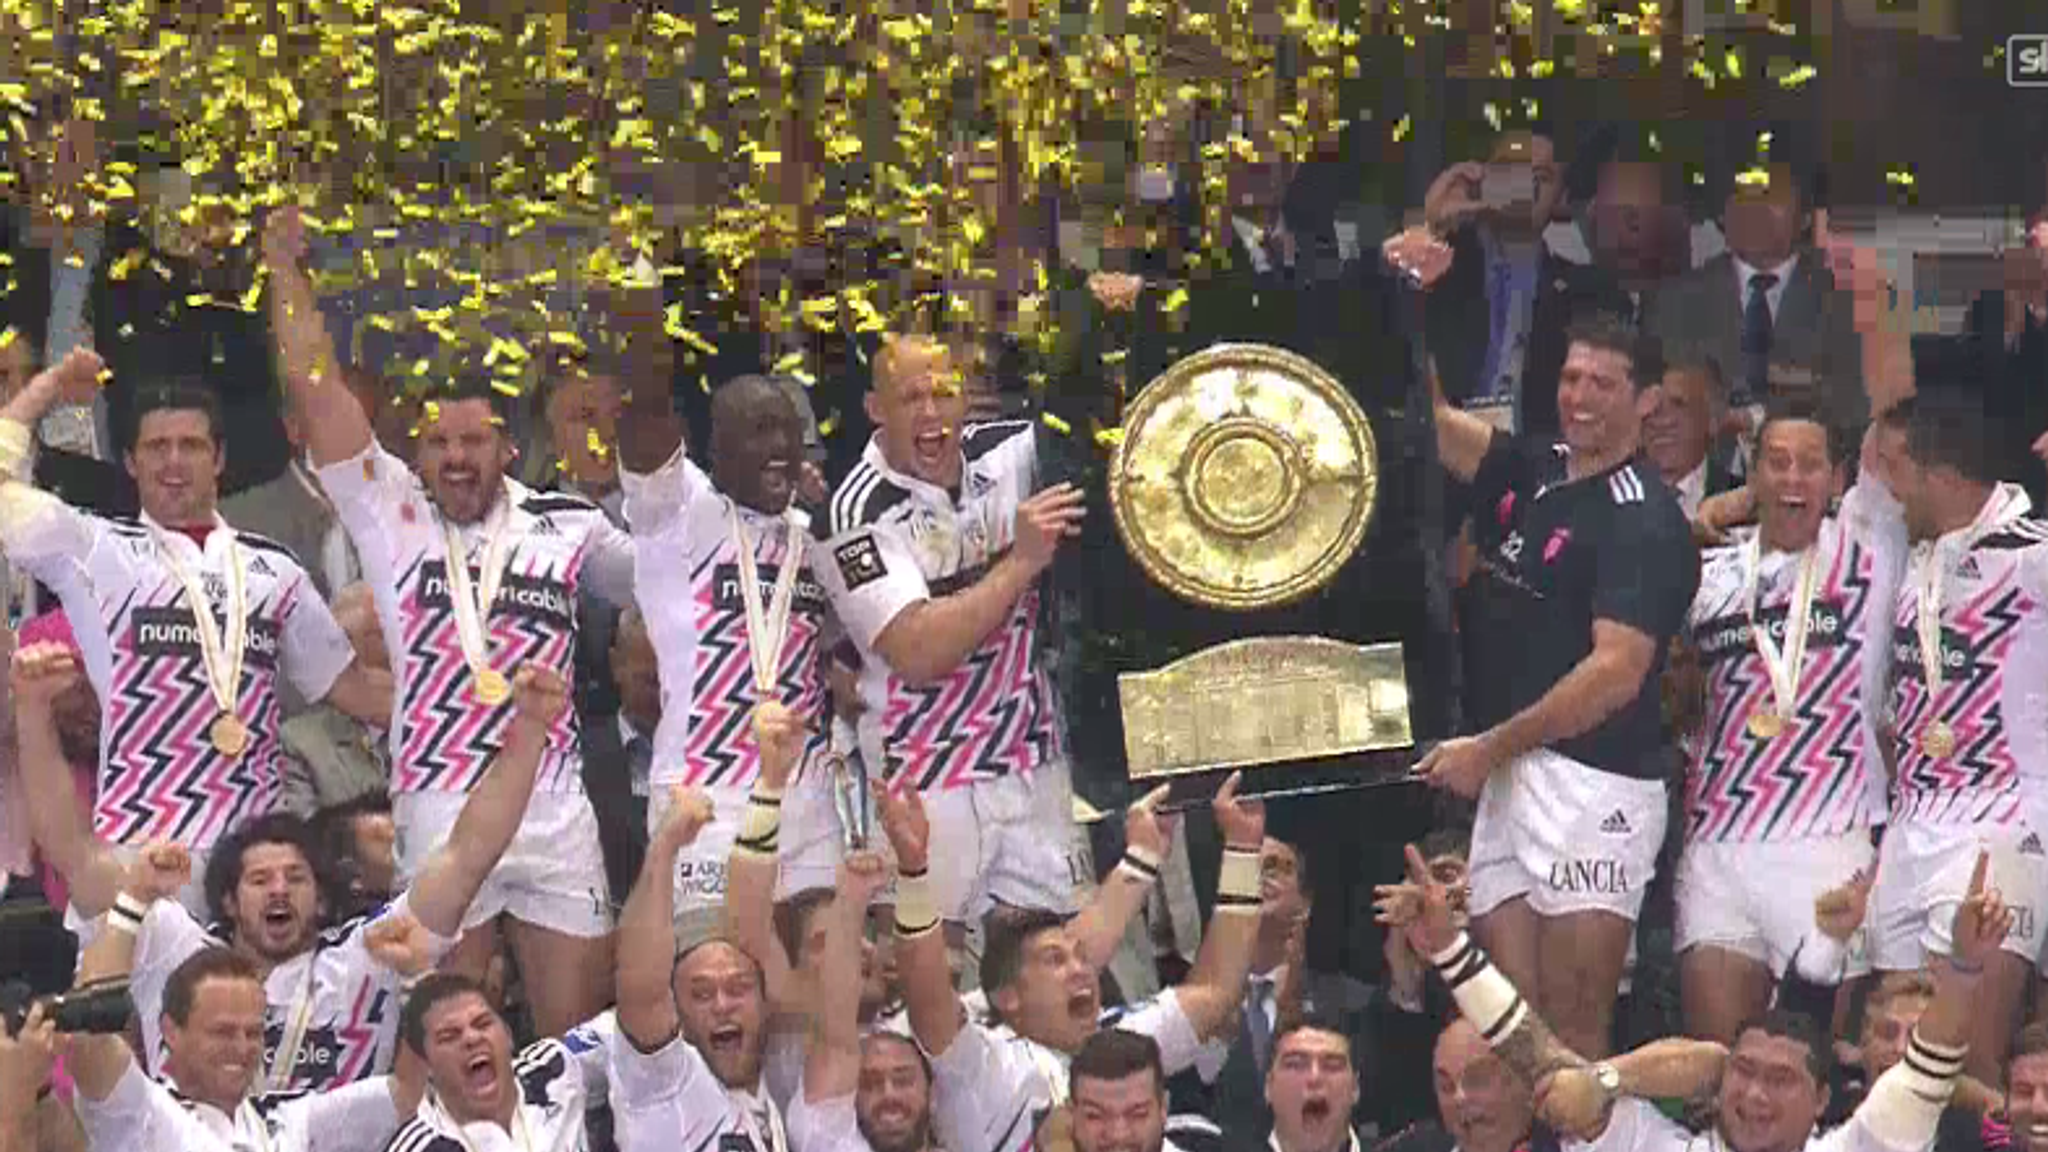 Stade Francais beat Clermont 12-6 to win the 2014-15 Top 14 title at the Stade de France on Saturday Rugby Union News Sky Sports